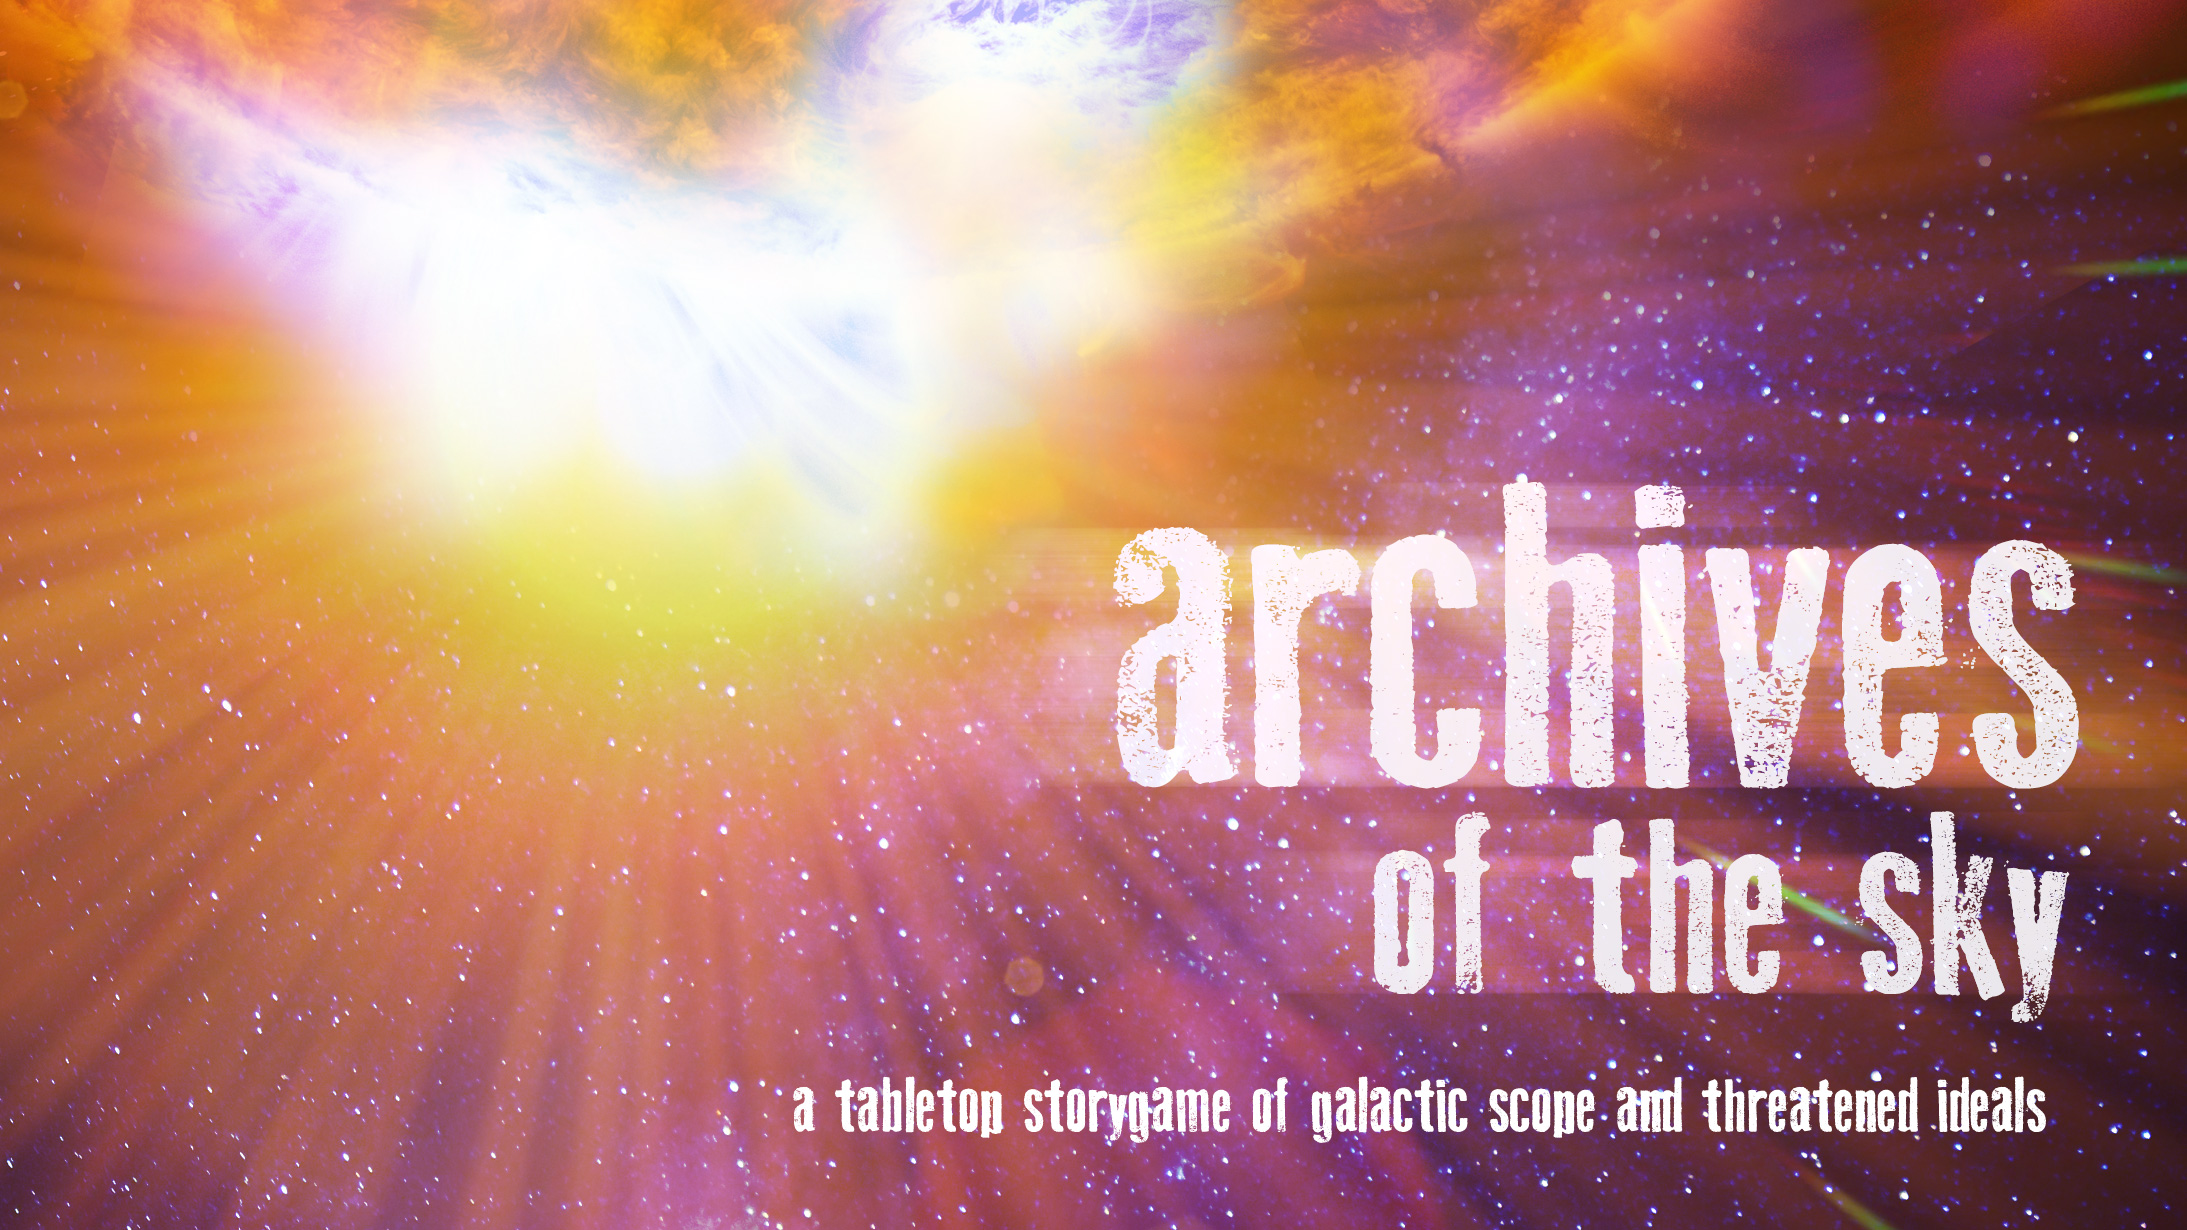 Archives of the Sky